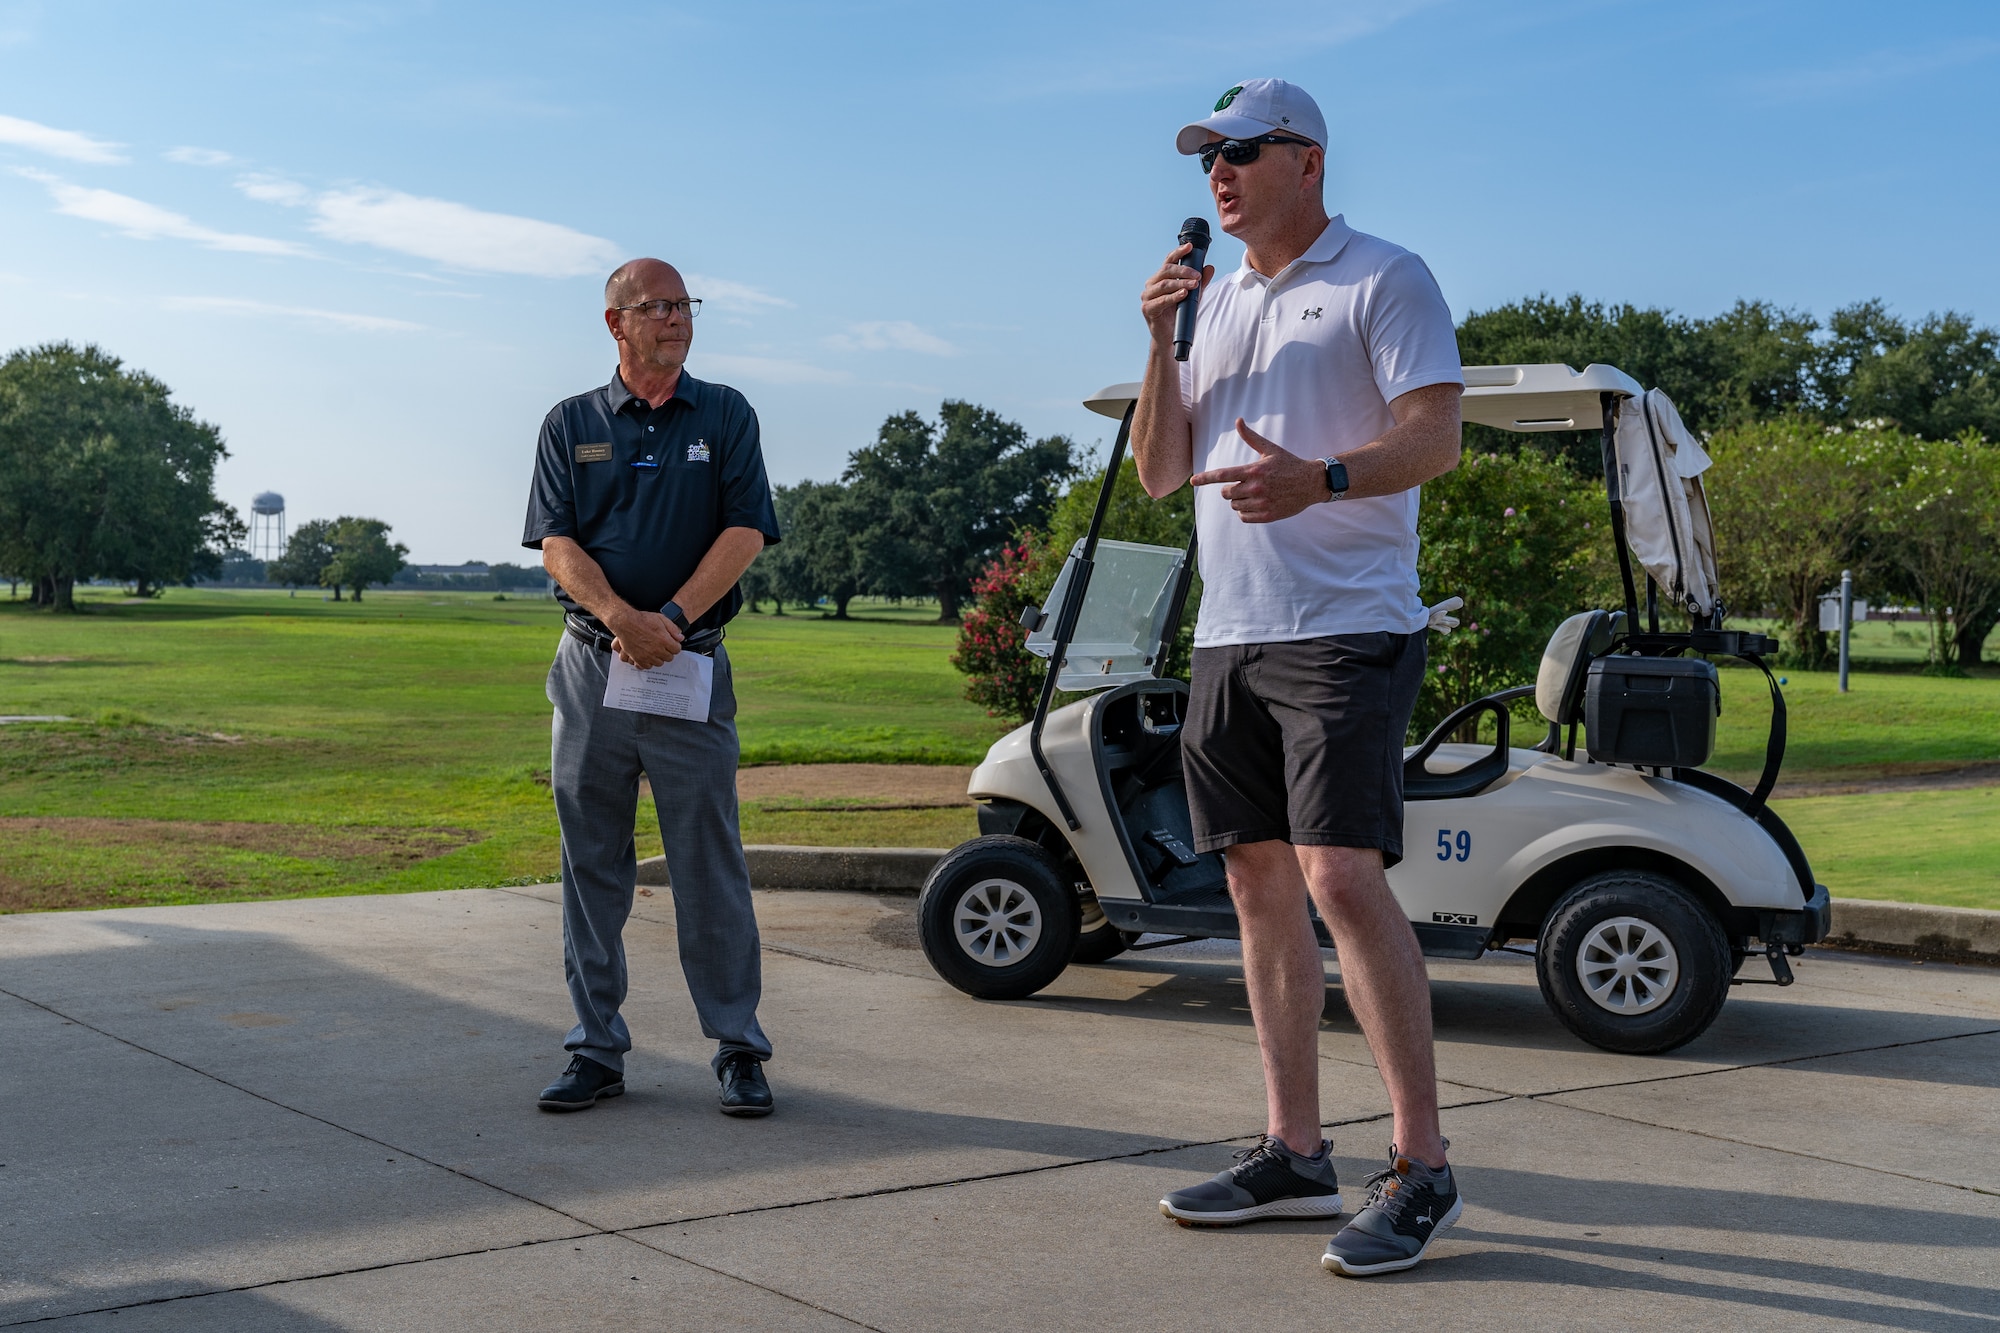 U.S. Air Force Col. Chad Gemeinhardt, 81st Mission Support Group commander, and Luke Rooney, golf center director, welcomes golfers to the annual Don Wylie Golf Tournament at Keesler Air Force Base, Mississippi, Sept. 16, 2023.